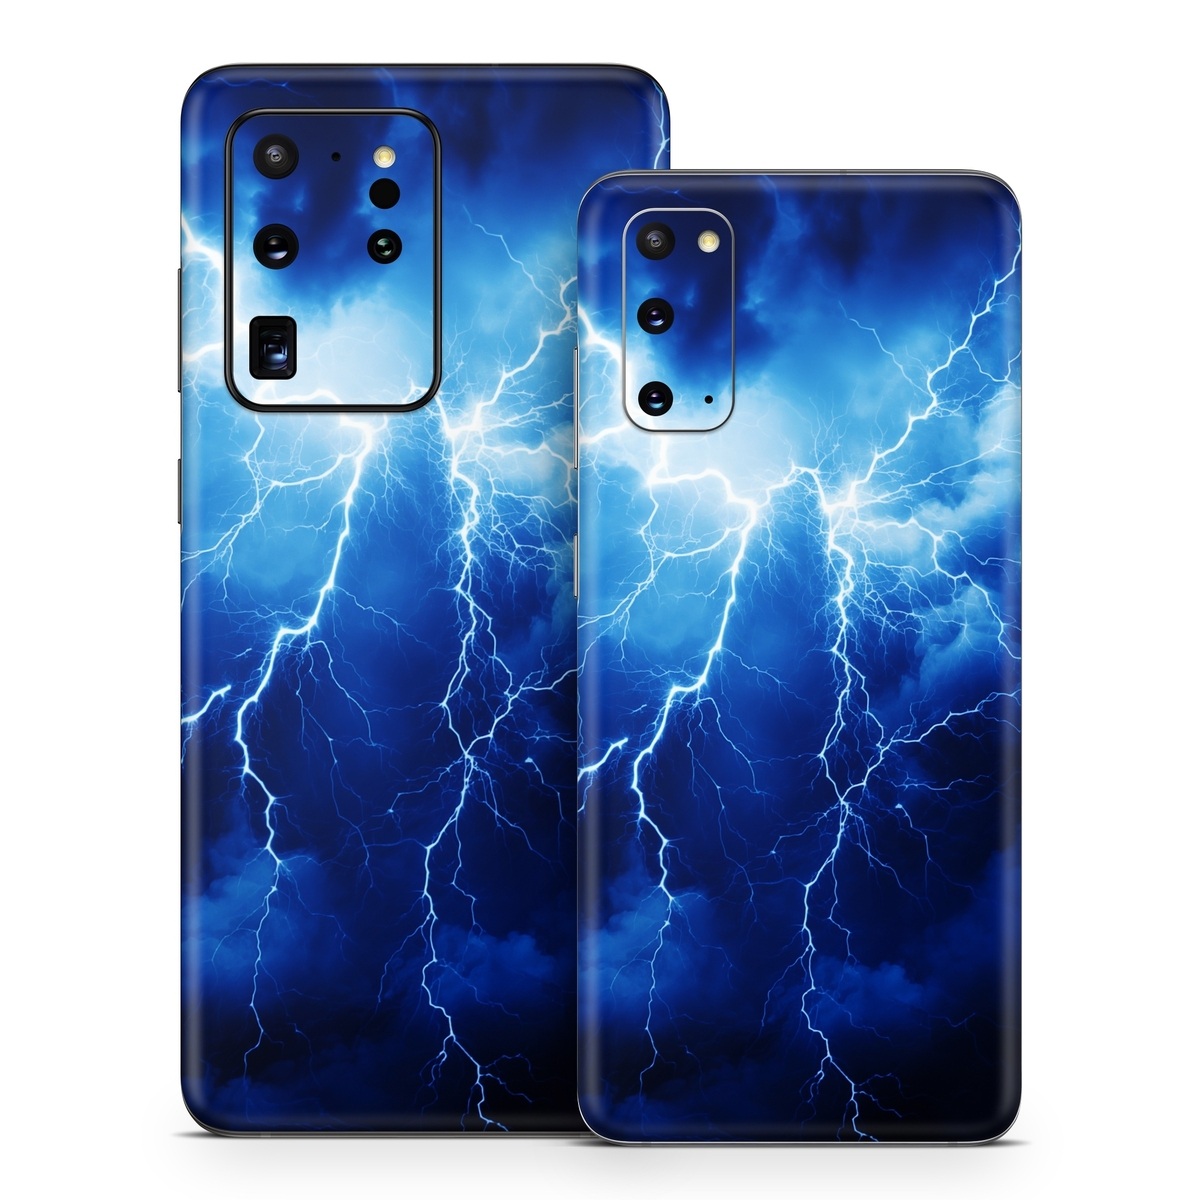 Samsung Galaxy S20 Series Skin design of Thunder, Sky, Atmosphere, Daytime, Cloud, Water, Lightning, Light, Azure, Natural environment, with black, blue colors